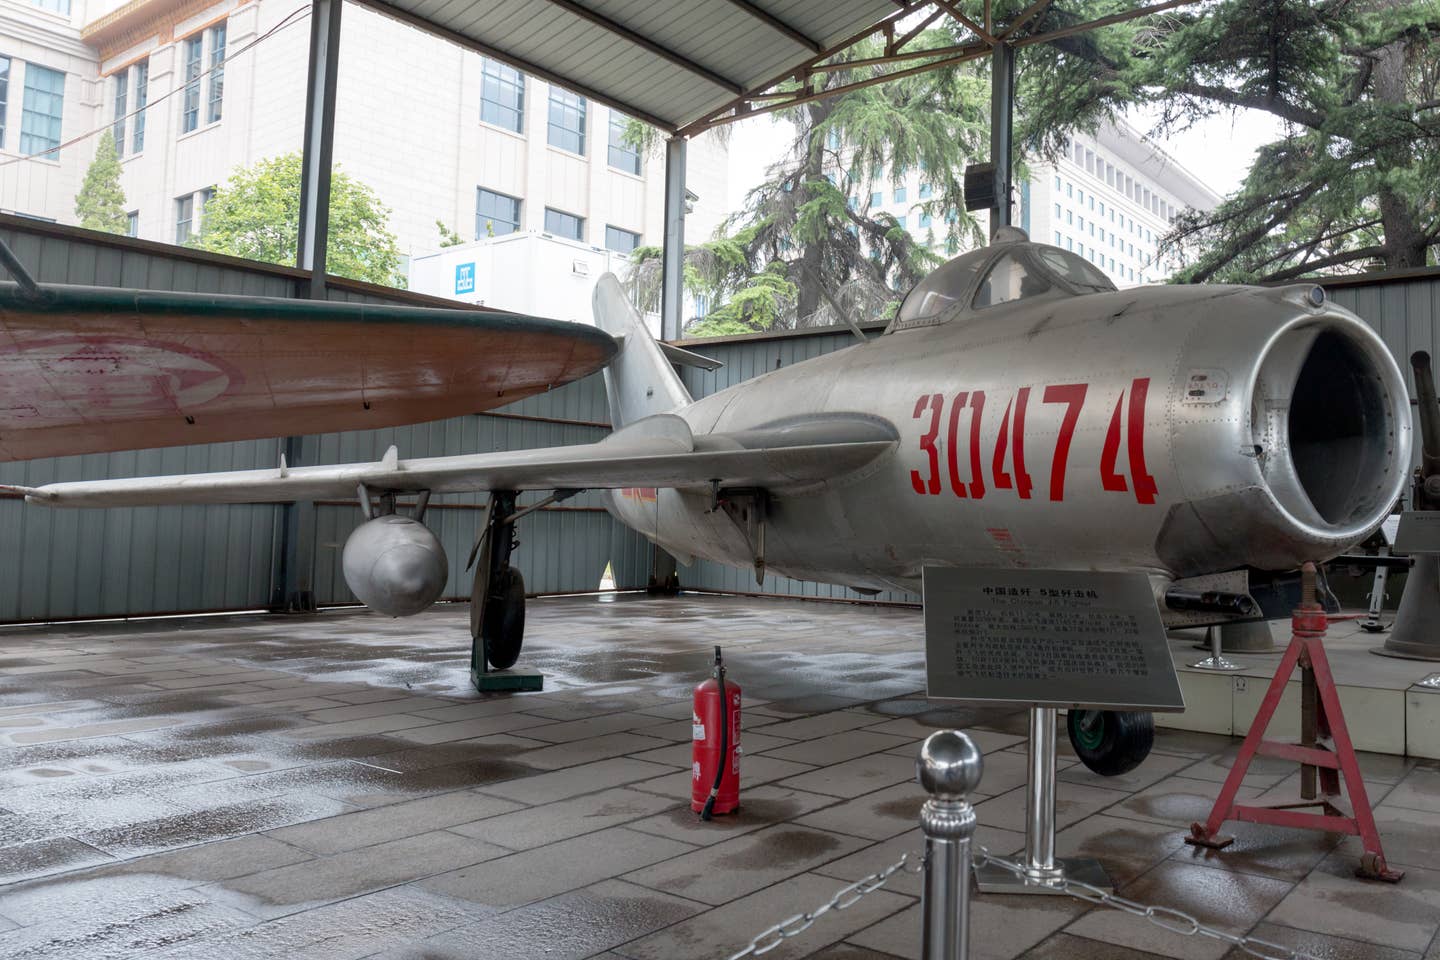 message-editor%2F1632839357467-shenyang_j-5_front-right2_2015_military_museum_beijing.jpg